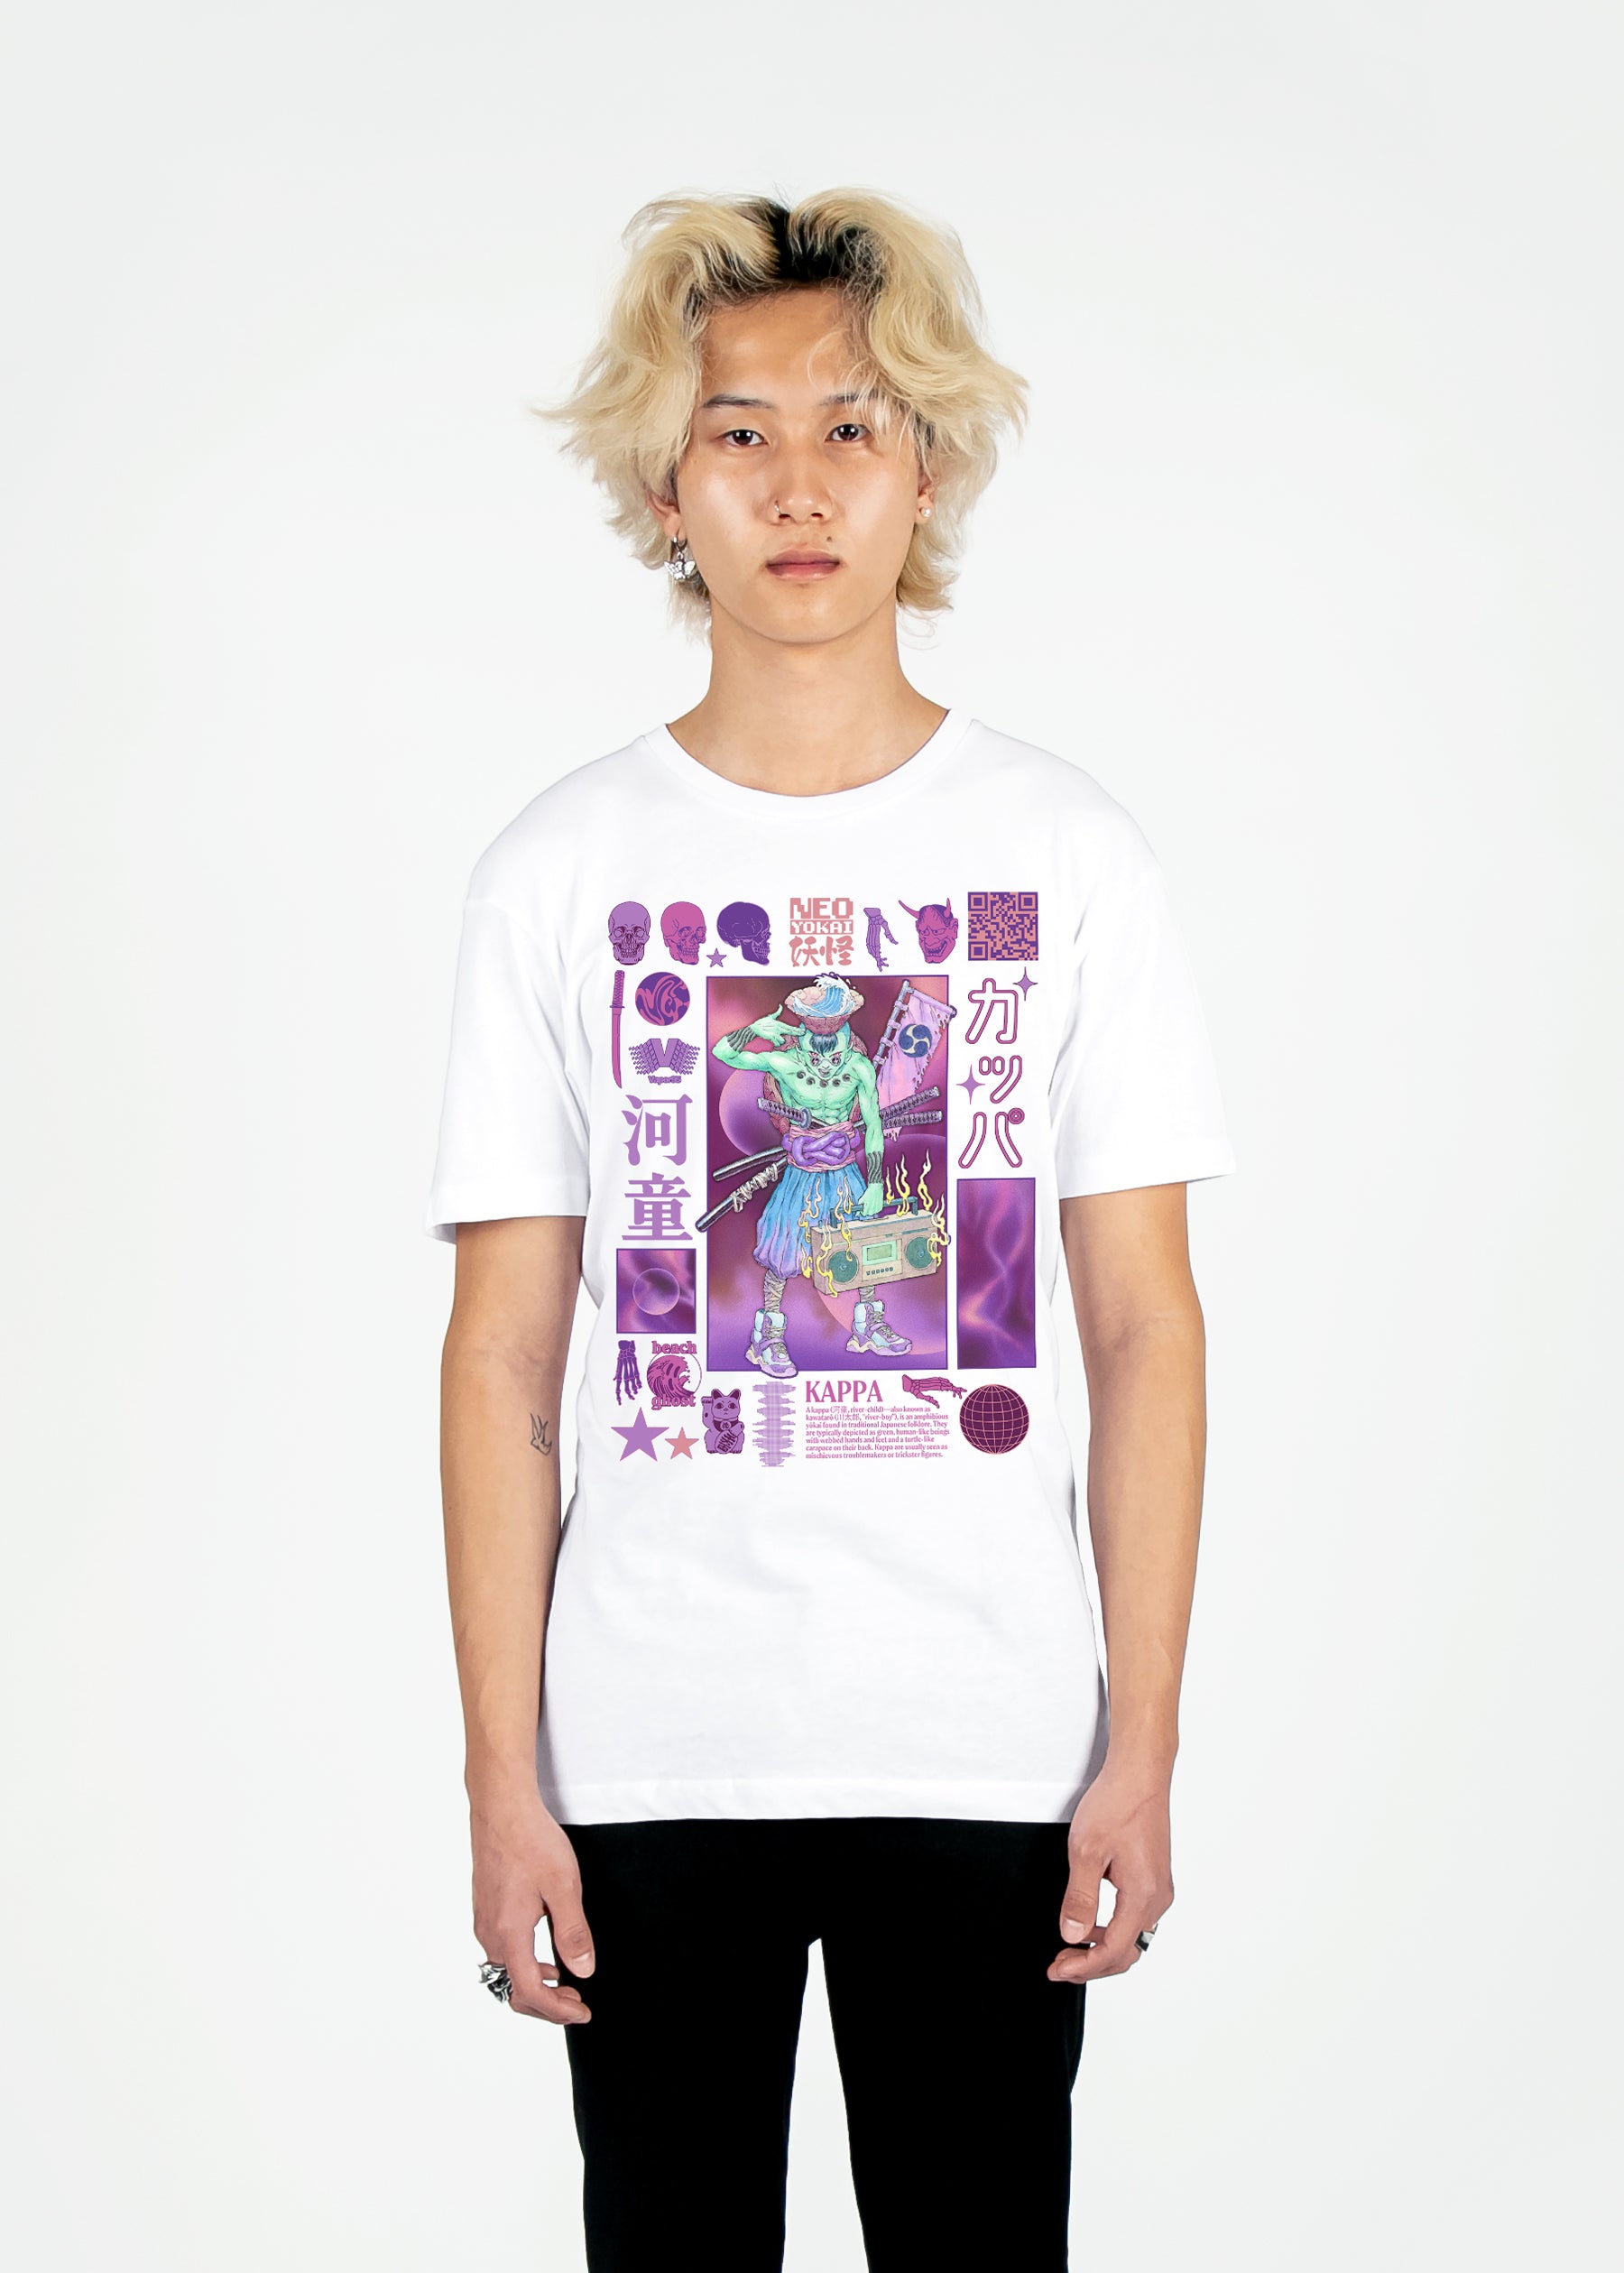 Experience and Vaporwave fashion with Vapor95's Tees | Tee